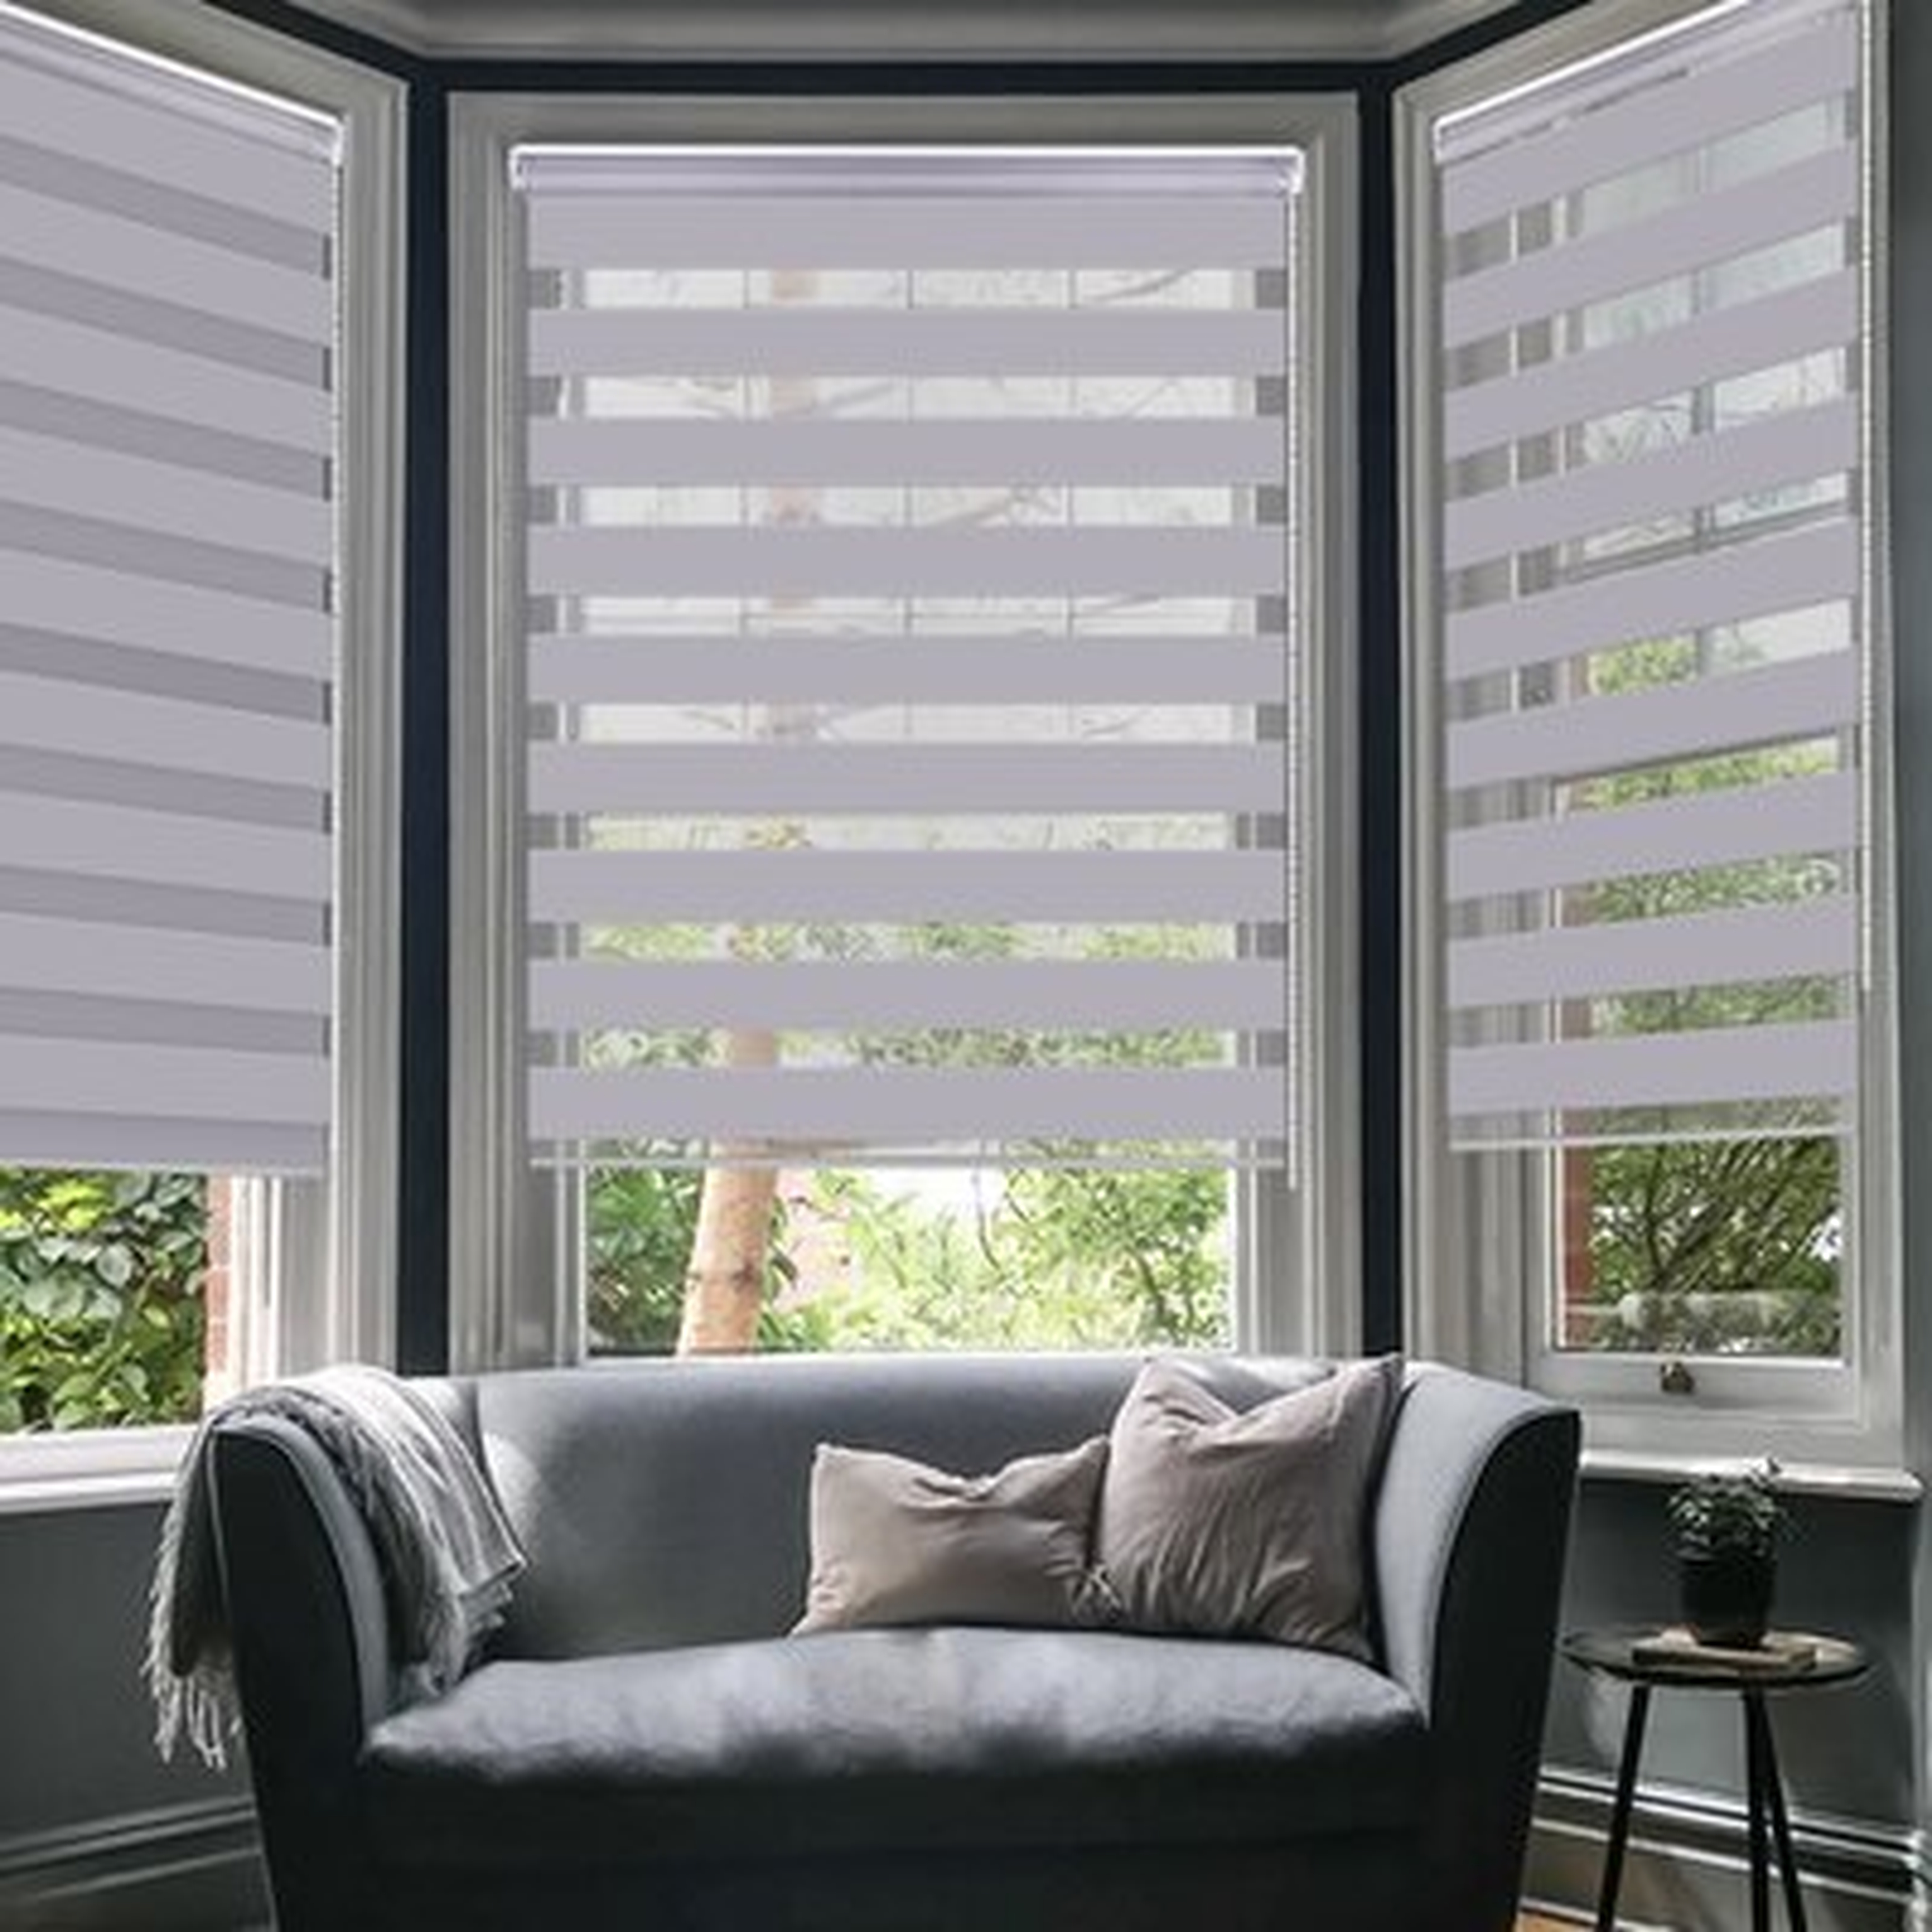 Horizontal Window Shade Blind Zebra Dual Roller Blinds Day And Night Blinds Curtains,Easy To Install - Wayfair